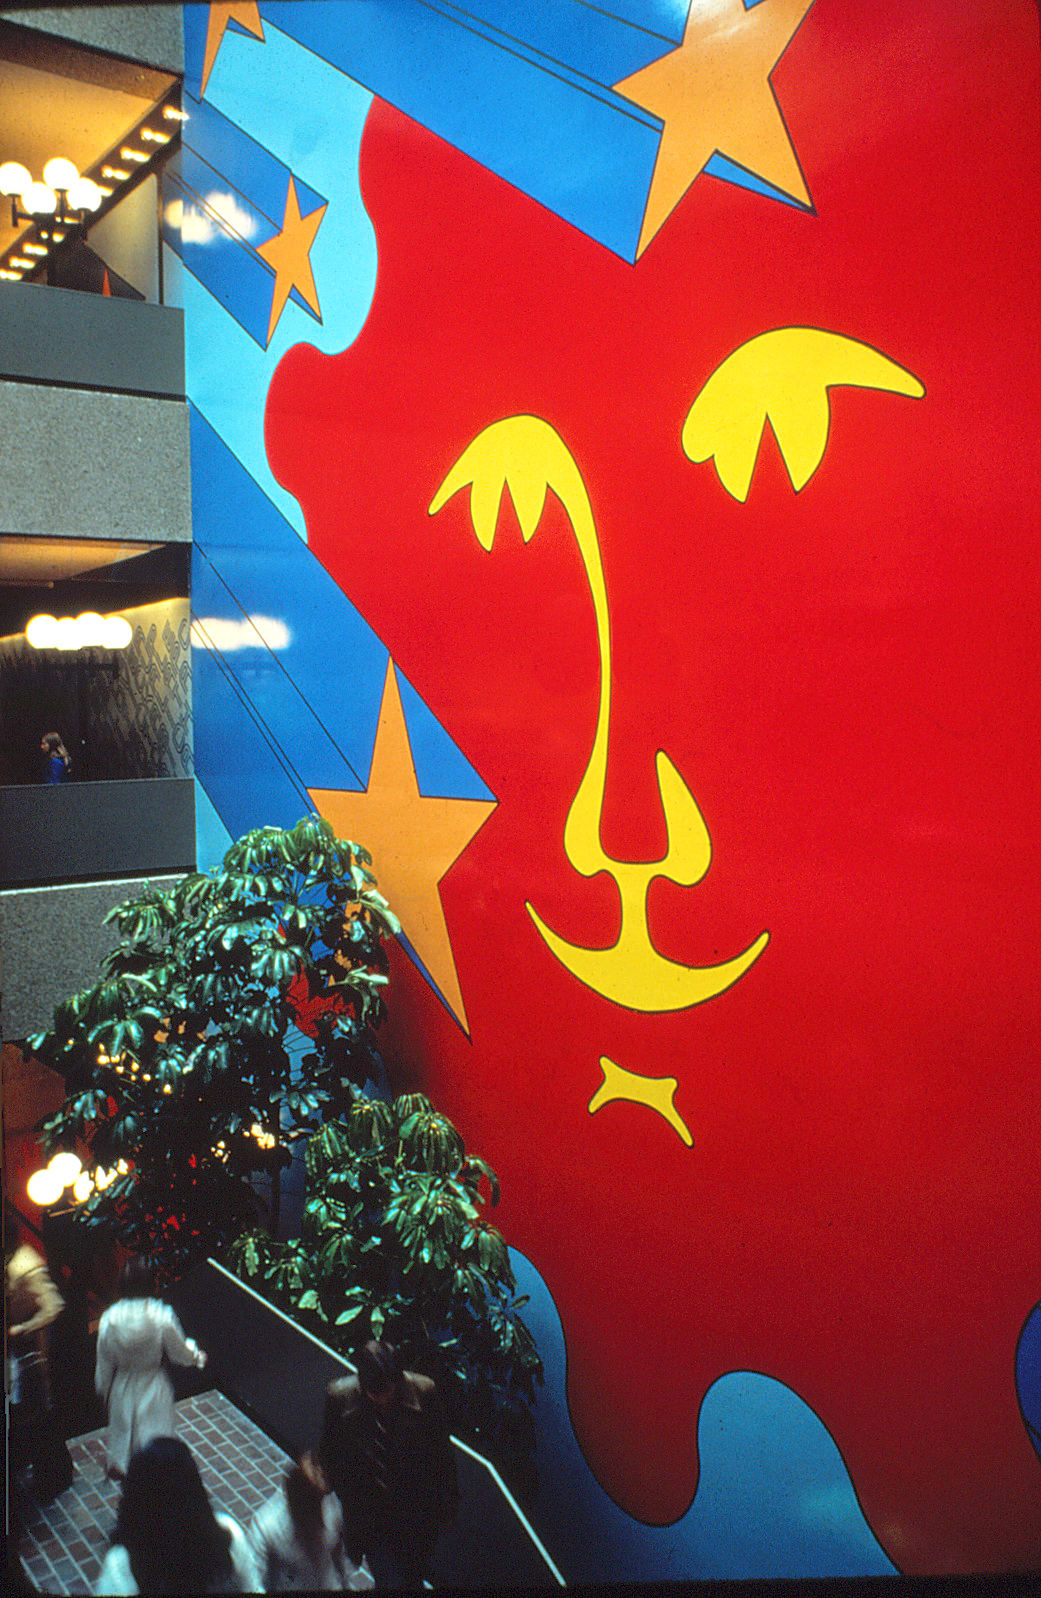 Large smiling face mural painted on a temporary wall during construction.